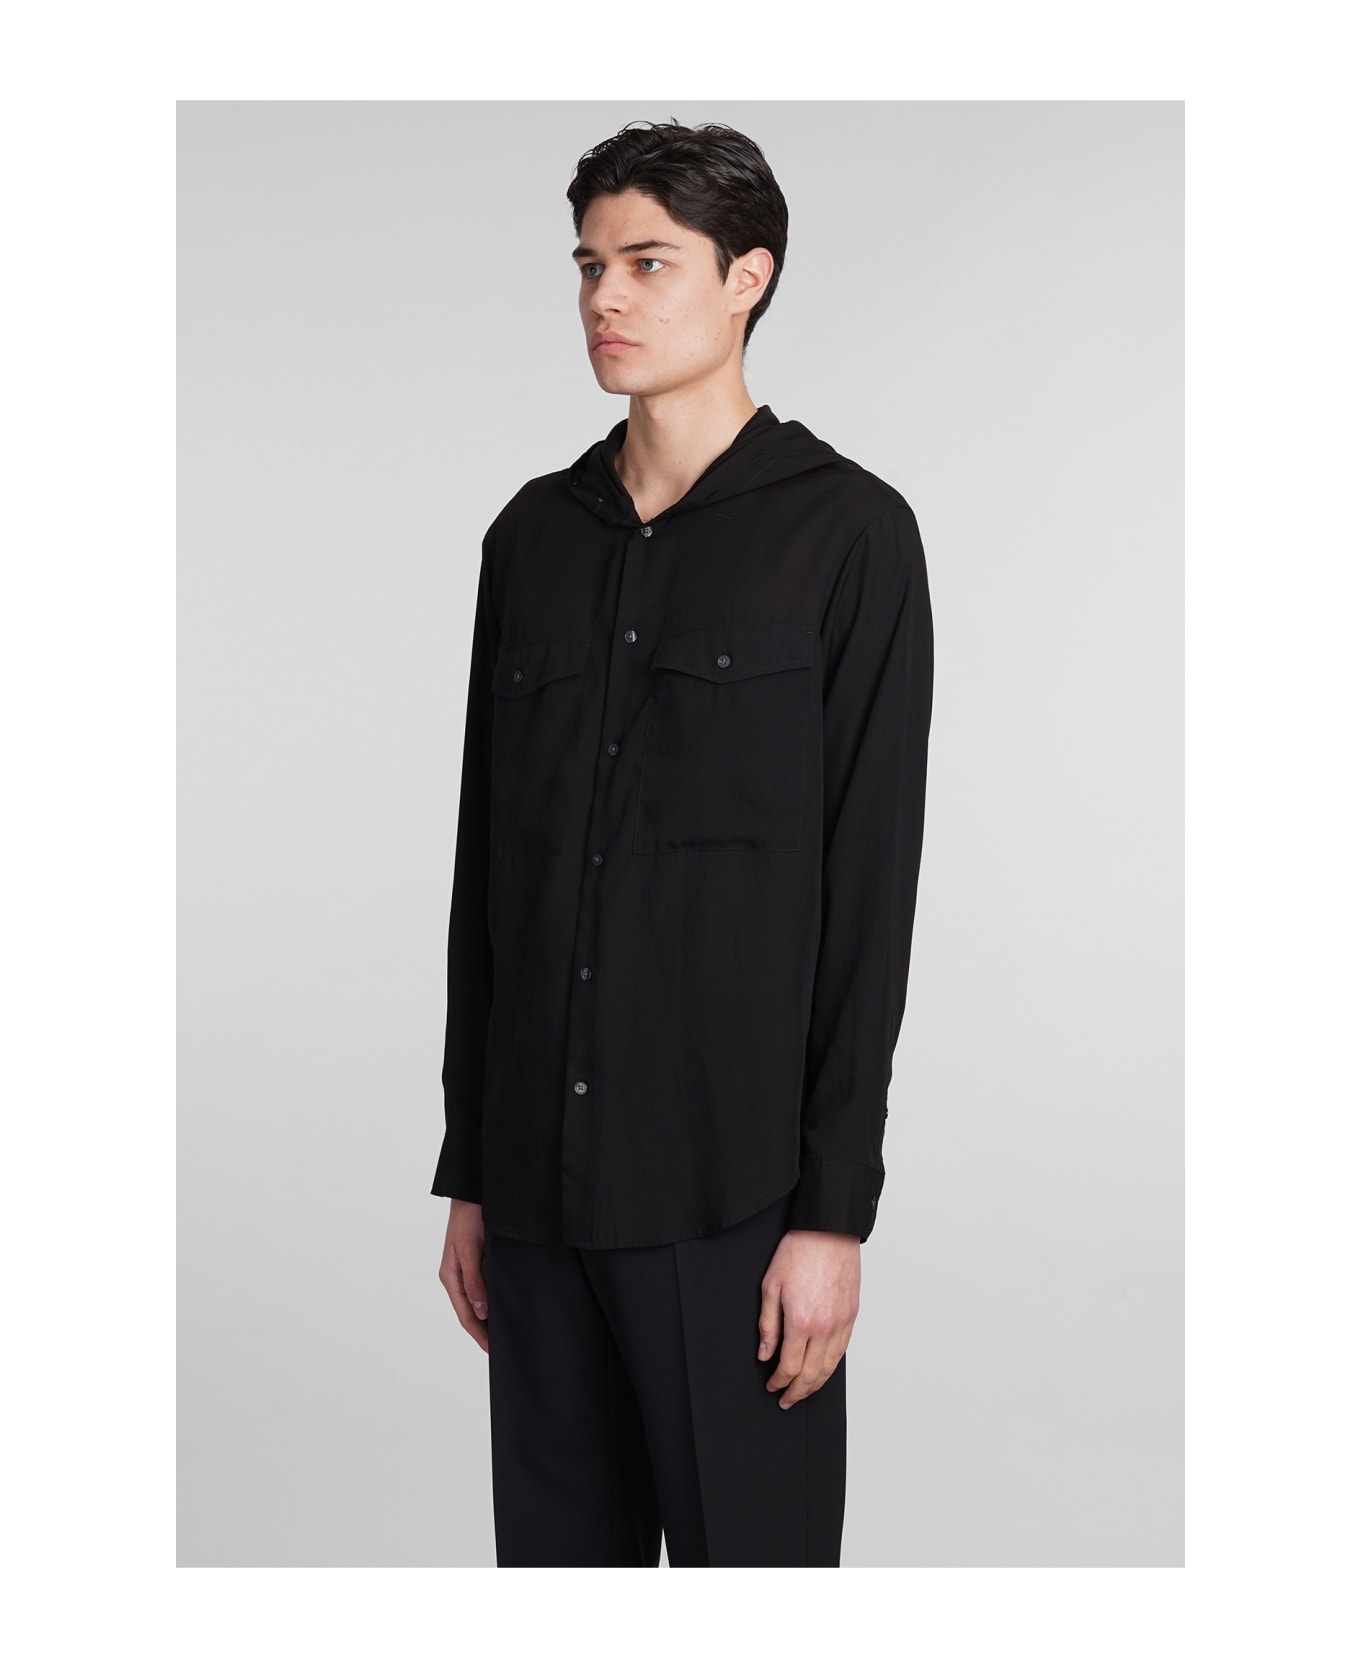 Emporio Armani Shirt In Black Wool And Polyester - black